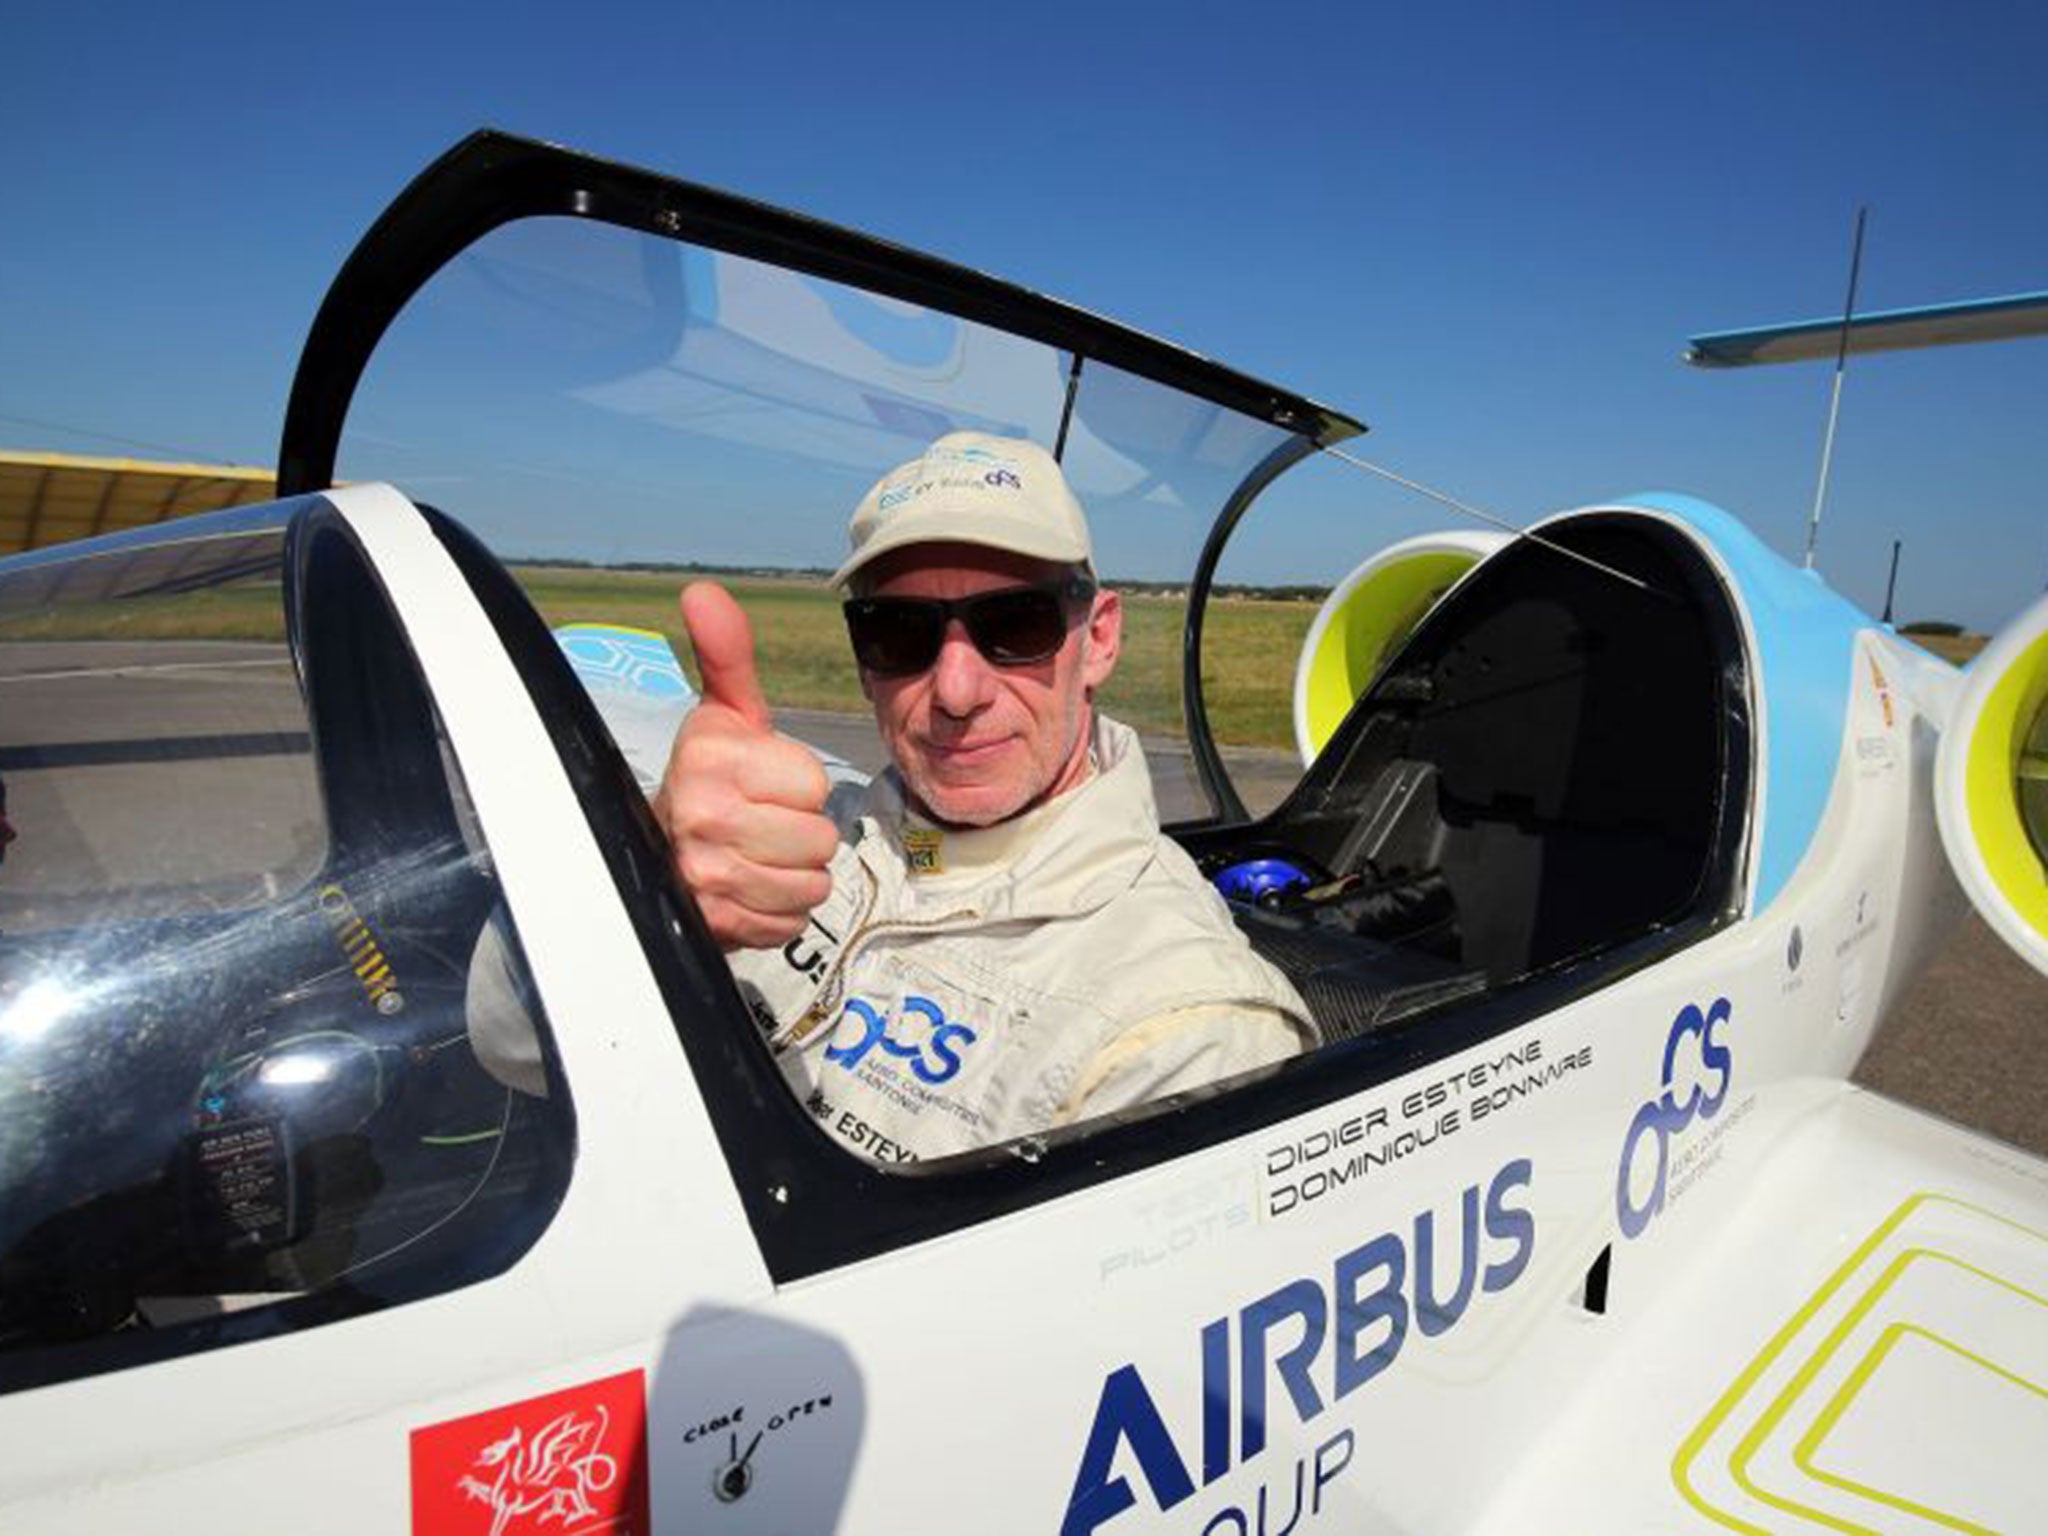 Pilot Didier Estyene after landing the E-Fan electrically powered plane in Calais, France, following his successful crossing of The Channel from Lydd Airport